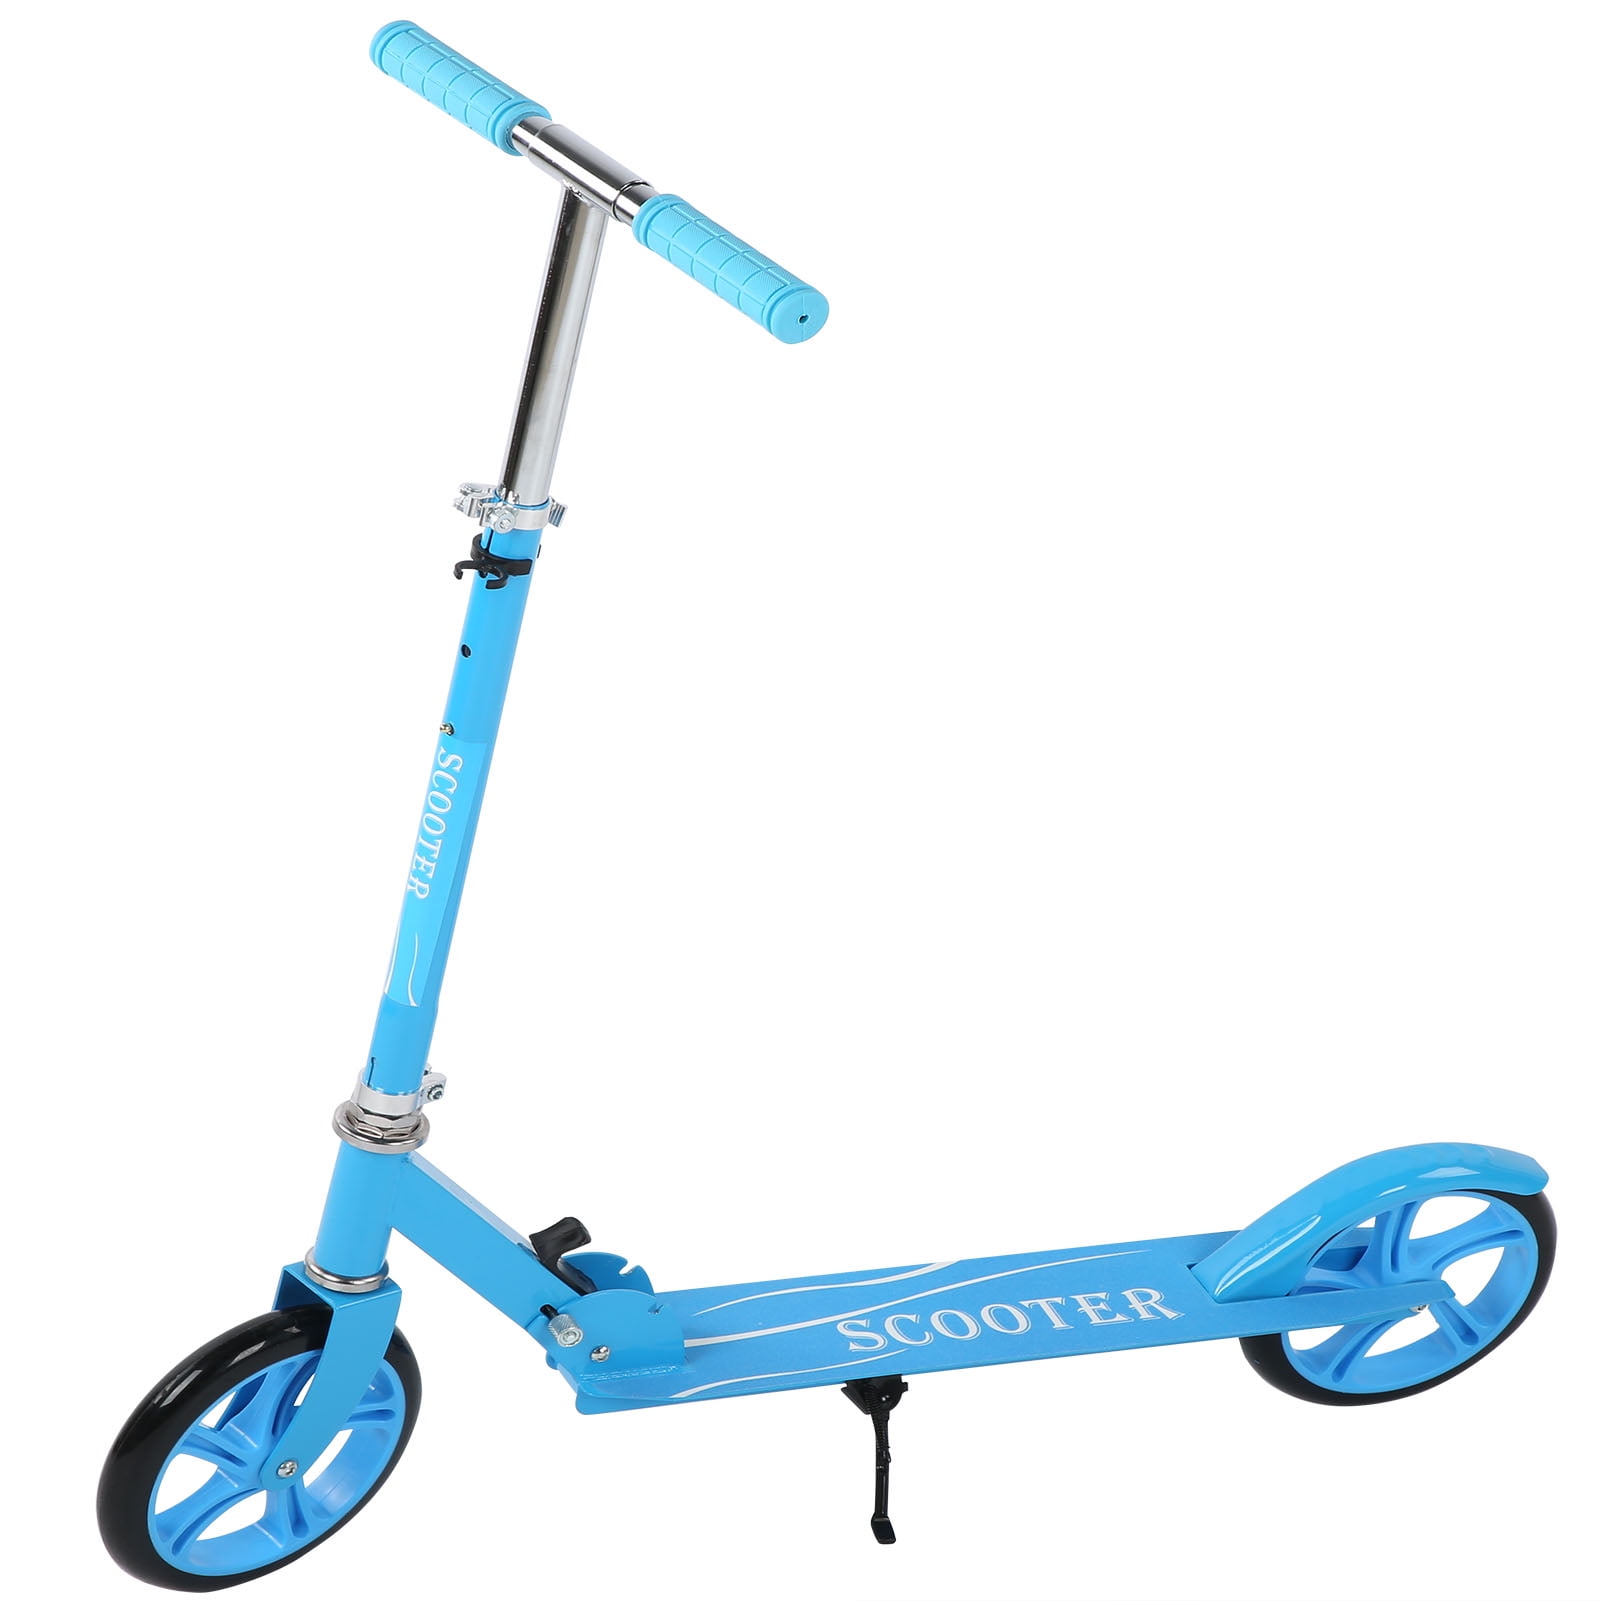 220 Lbs Max Load Adjustable Height Alloy Anti-Slip Deck Scooter for Kids Ages 8 and Up Foldable Lightweight Kick Scooter Teens Youth Kids Outdoor Toys with Front & Rear Brake 7.9 Big Wheels 